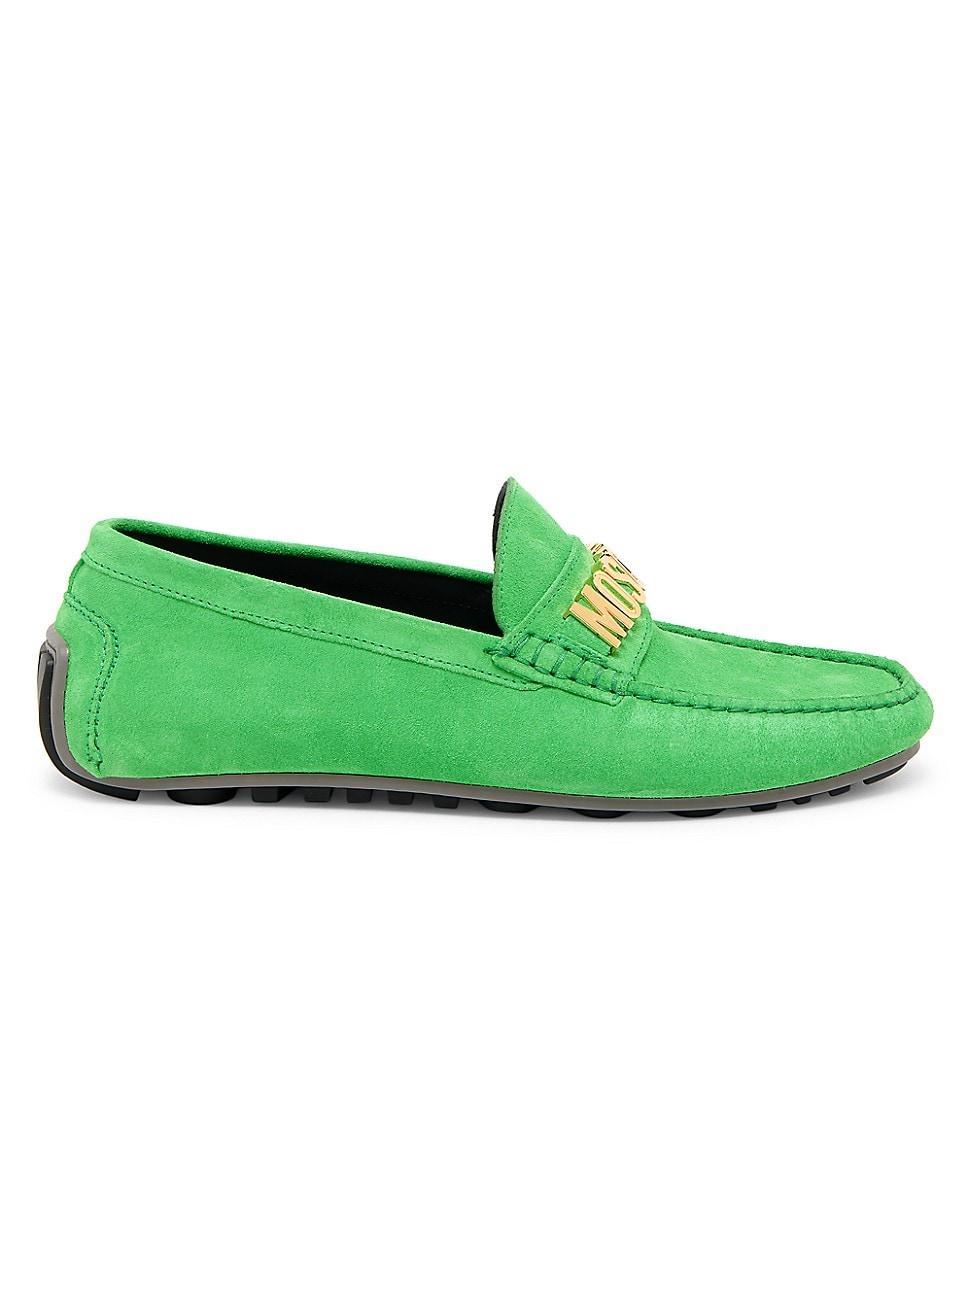 Mens Leather Driving Loafers Product Image